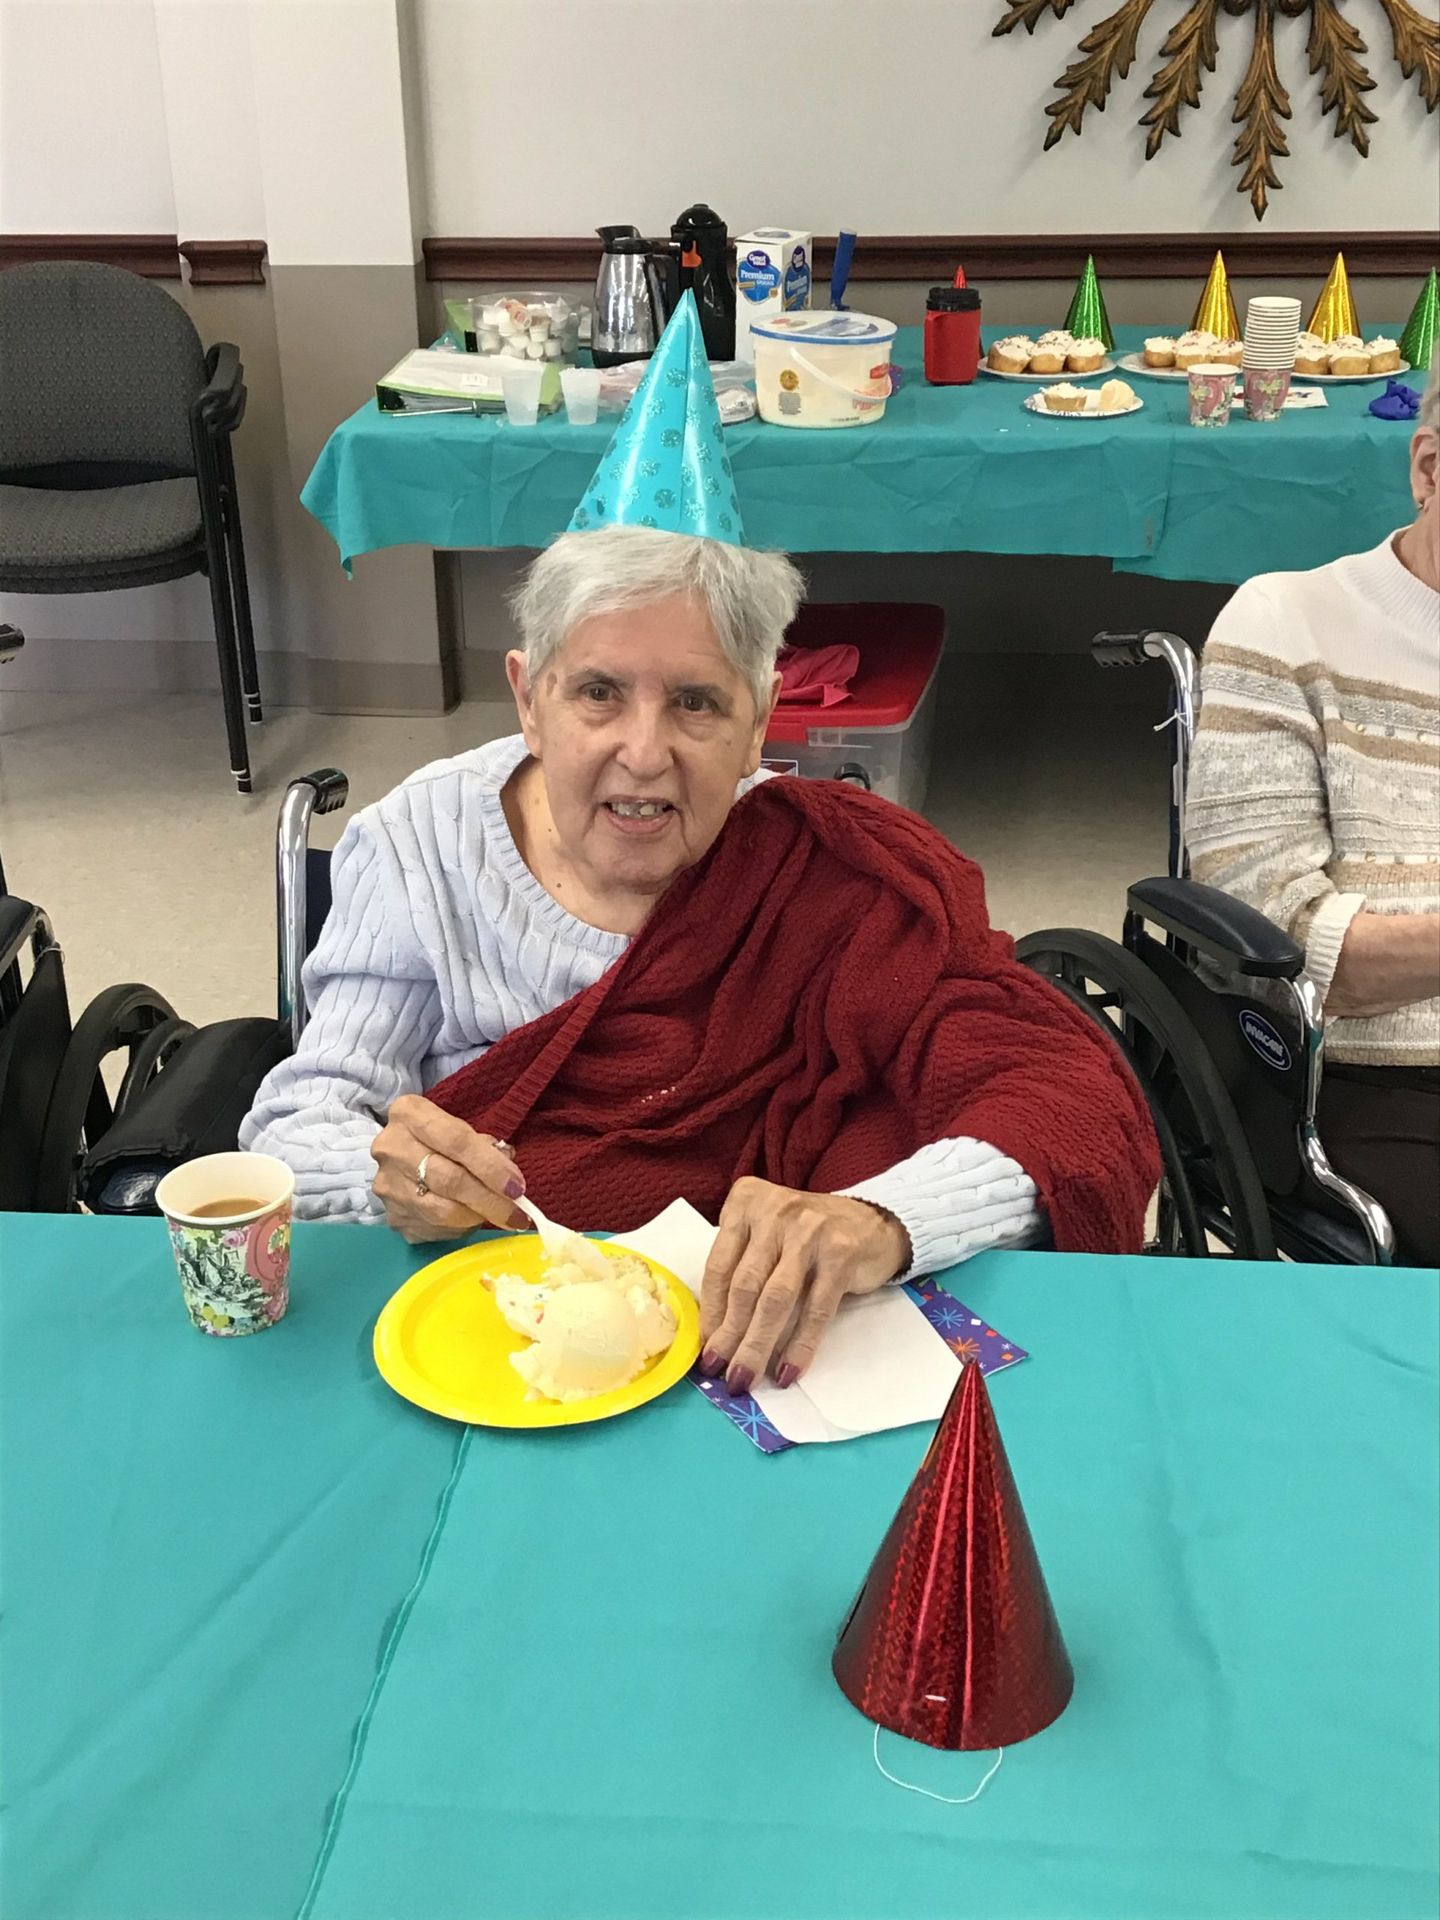 Elder eating cake at party at Lenawee Medical Care Facility in Adrian, MI